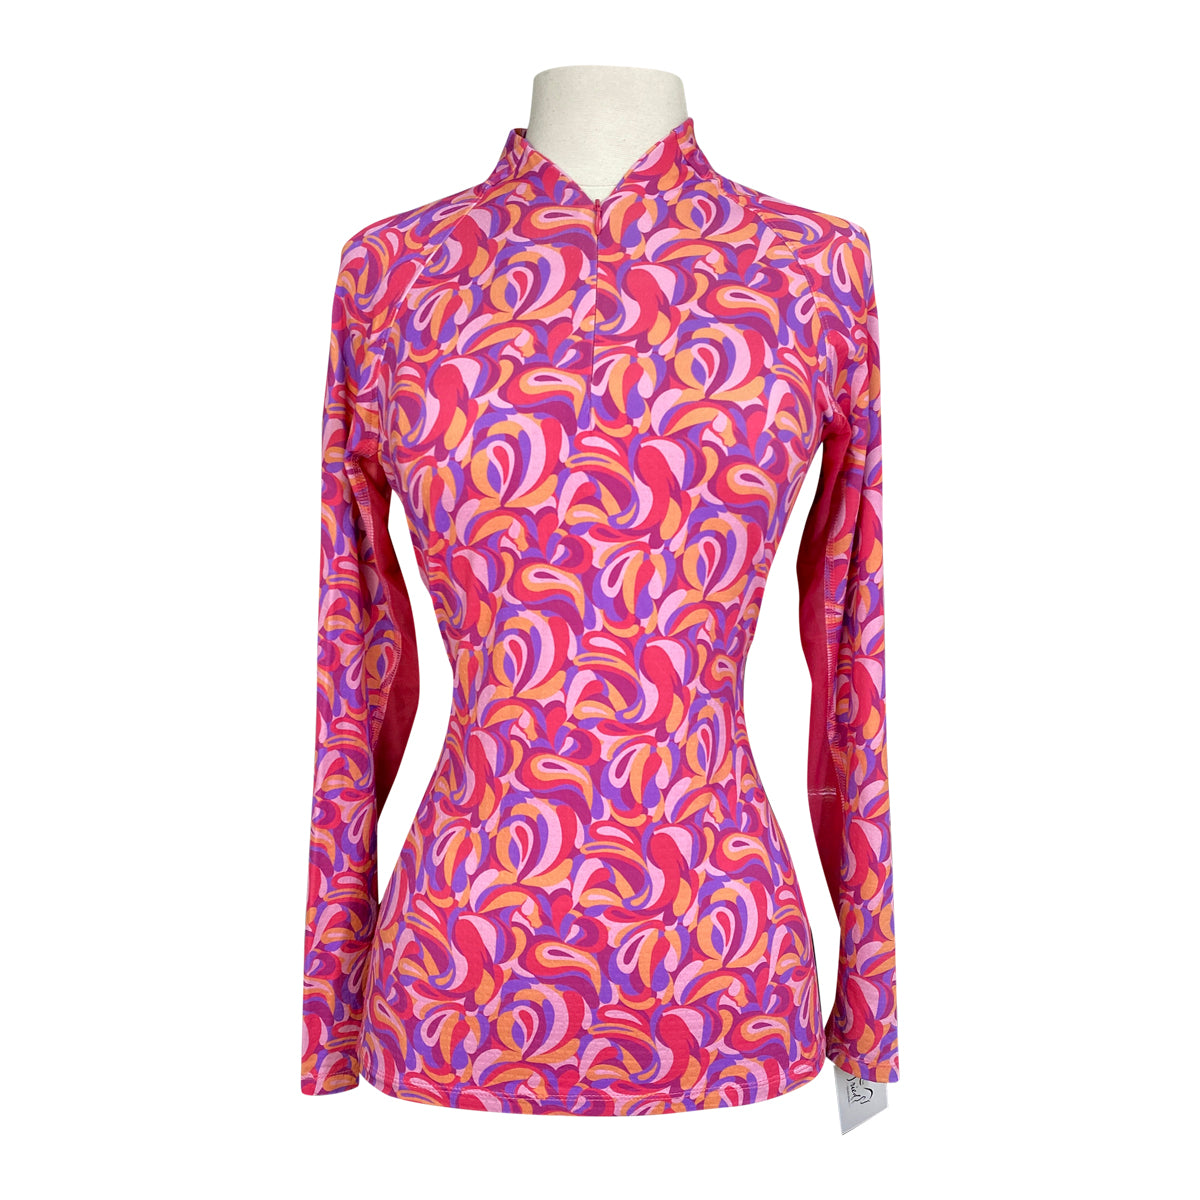 Dover CoolBlast 100 Fly Shield Sun Shirt in Abstract Floral